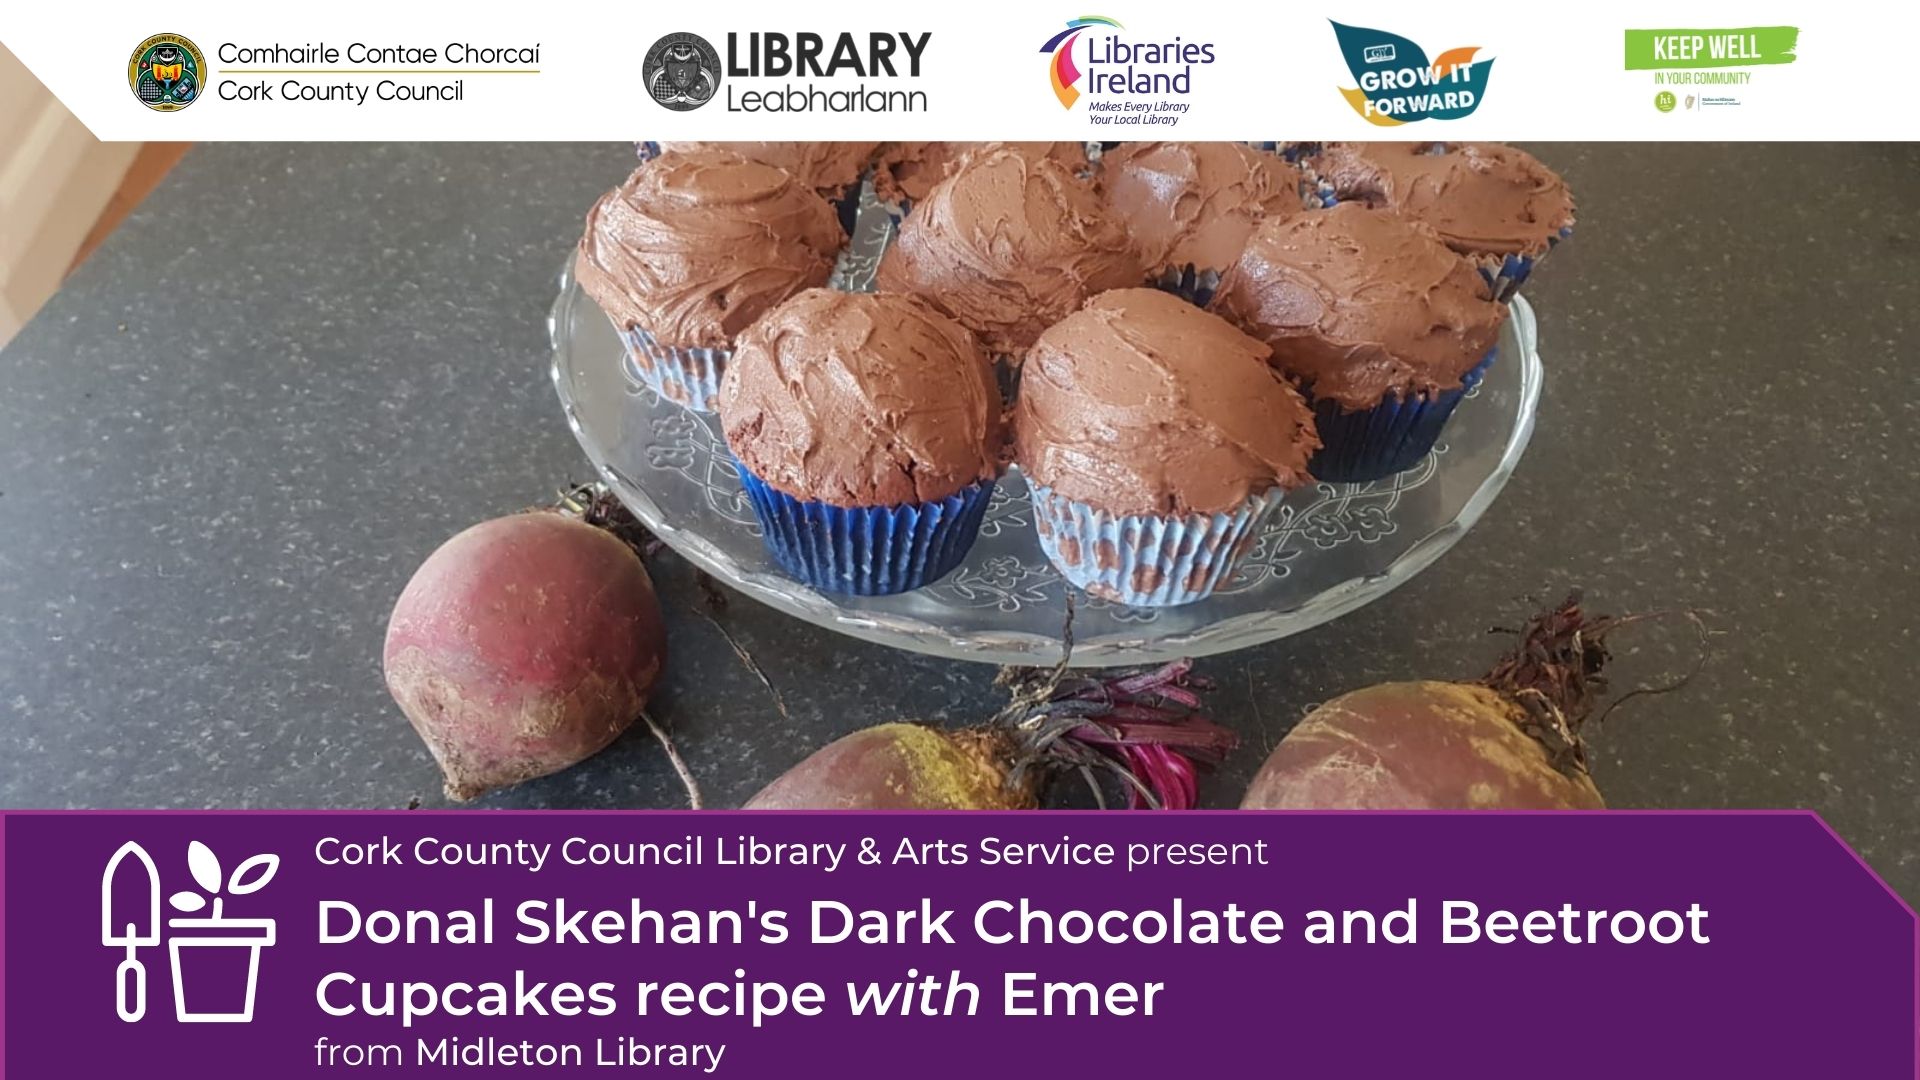 Donal Skehan's Dark Chocolate and Beetroot Cupcakes recipe with Emer from Midleton Library